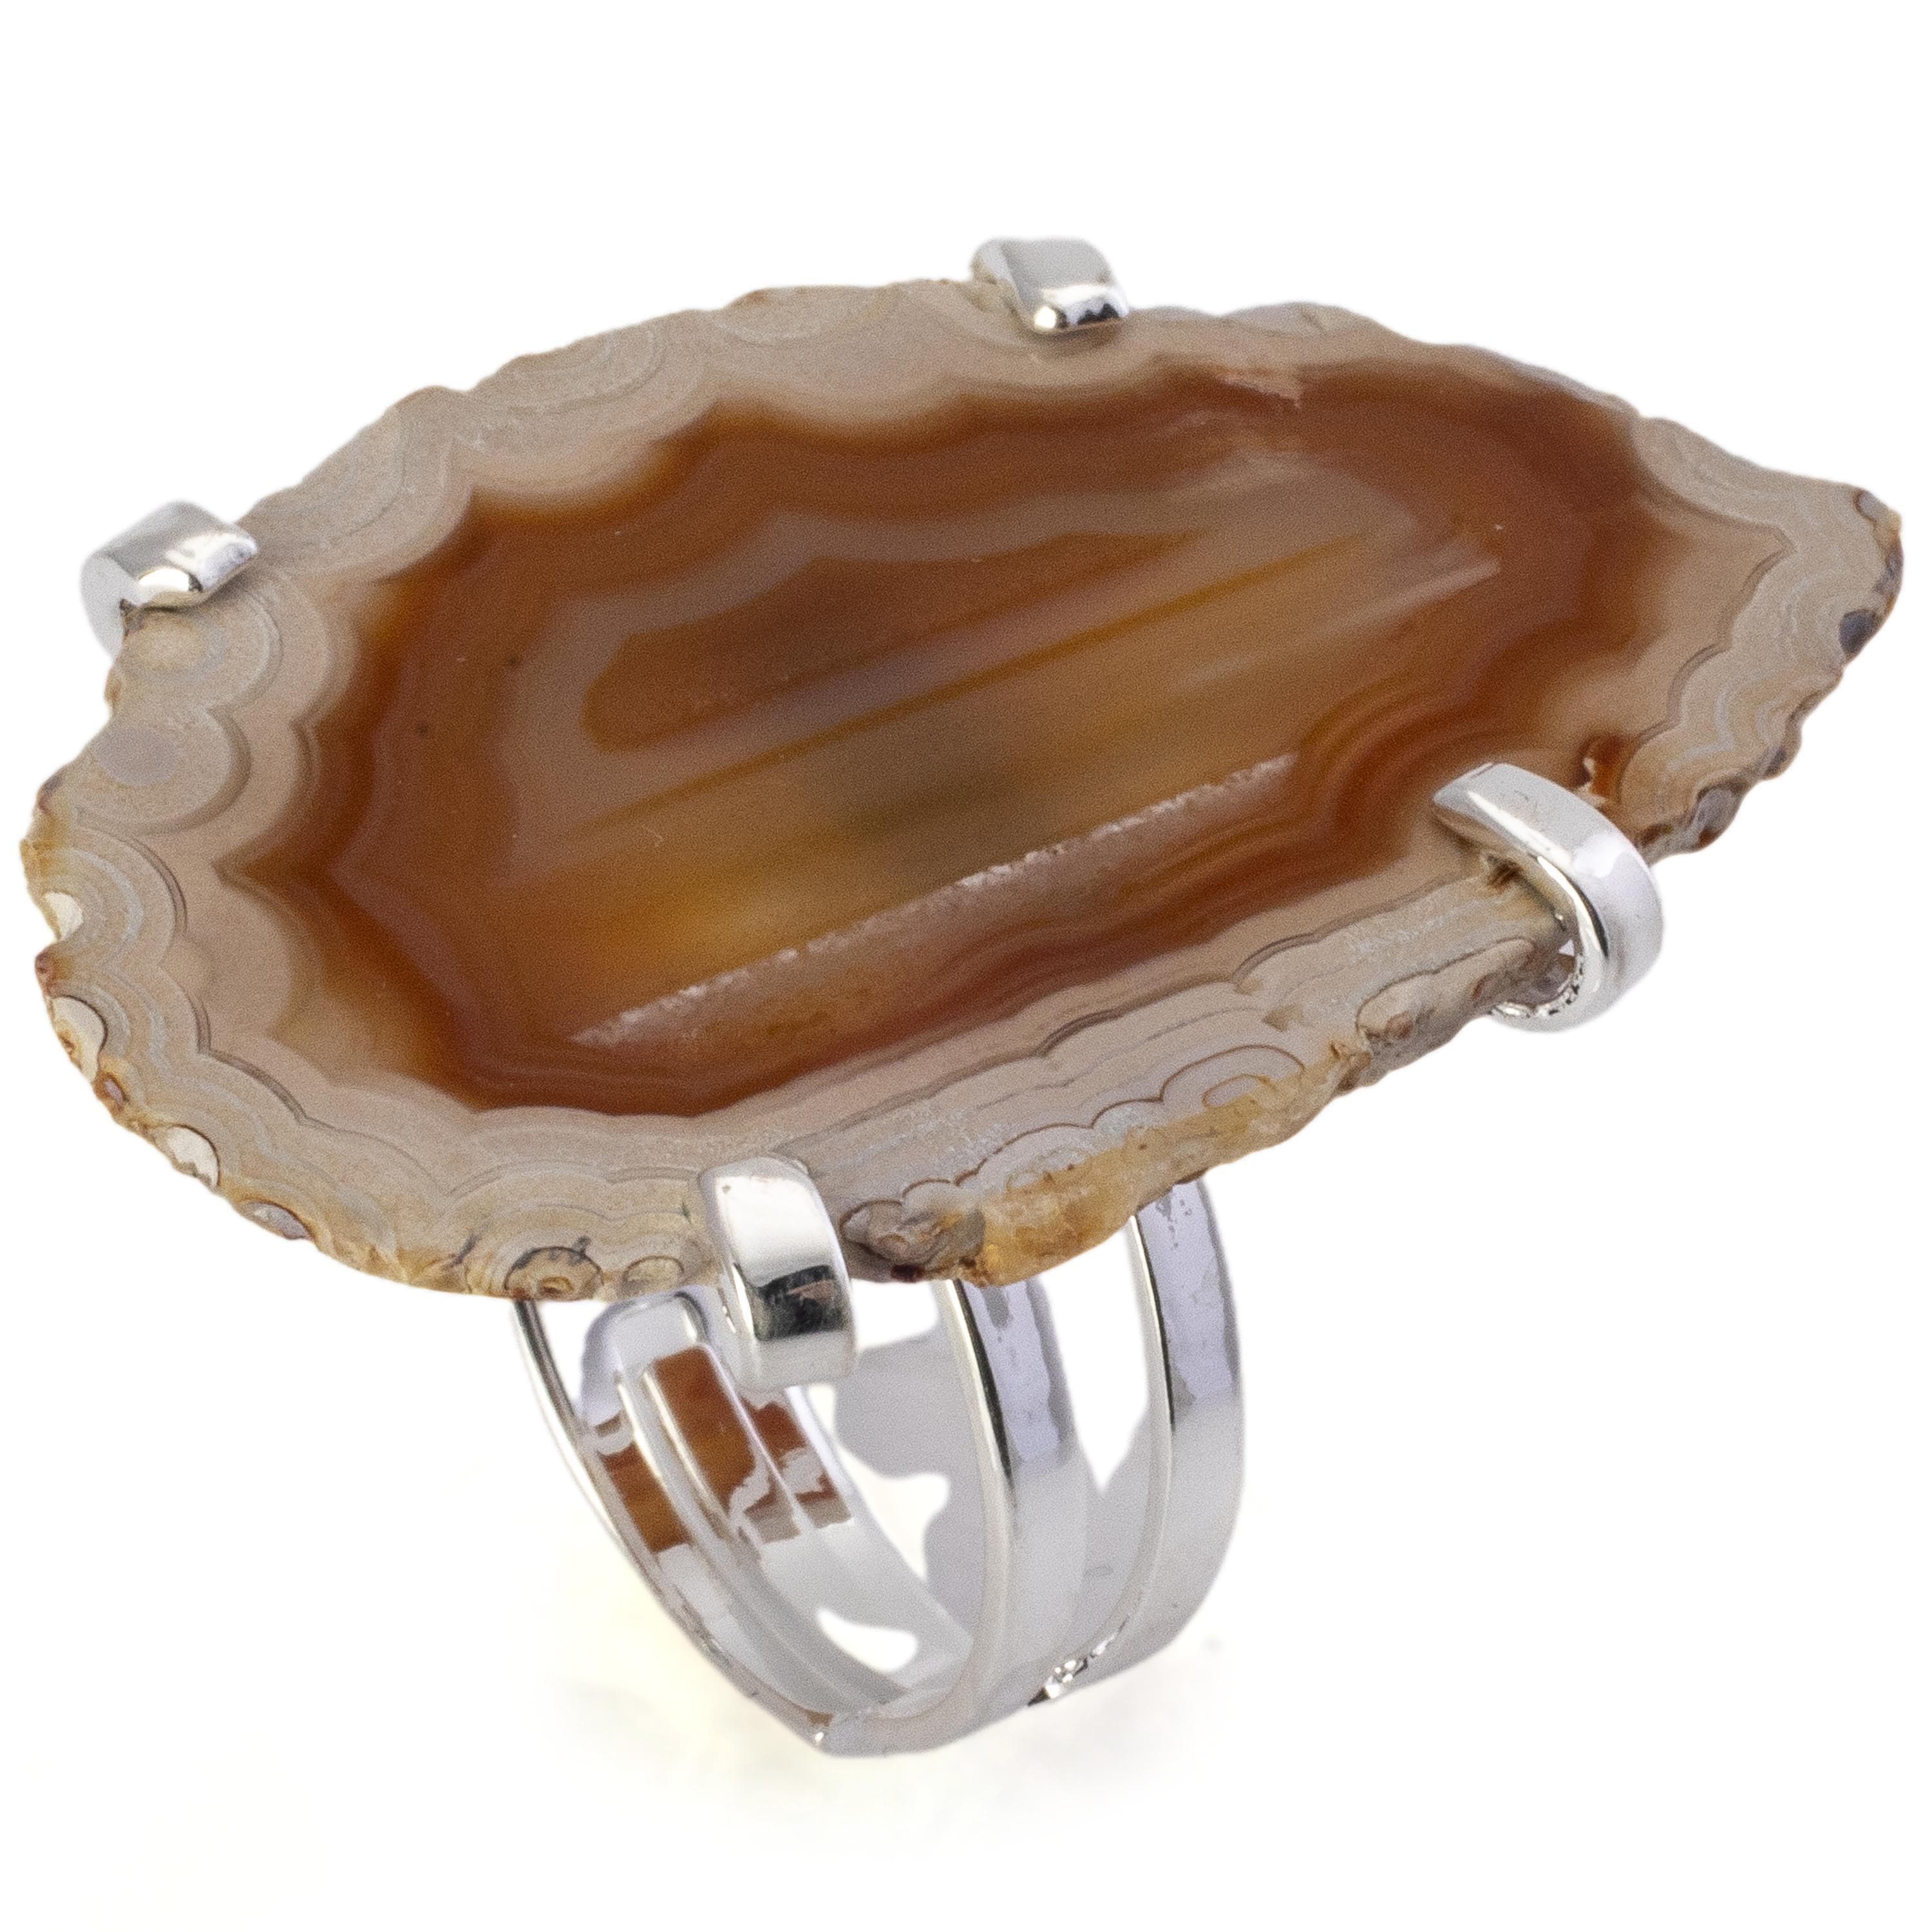 Kalifano Crystal Jewelry Agate Slice Adjustable Ring CJR-501-AG